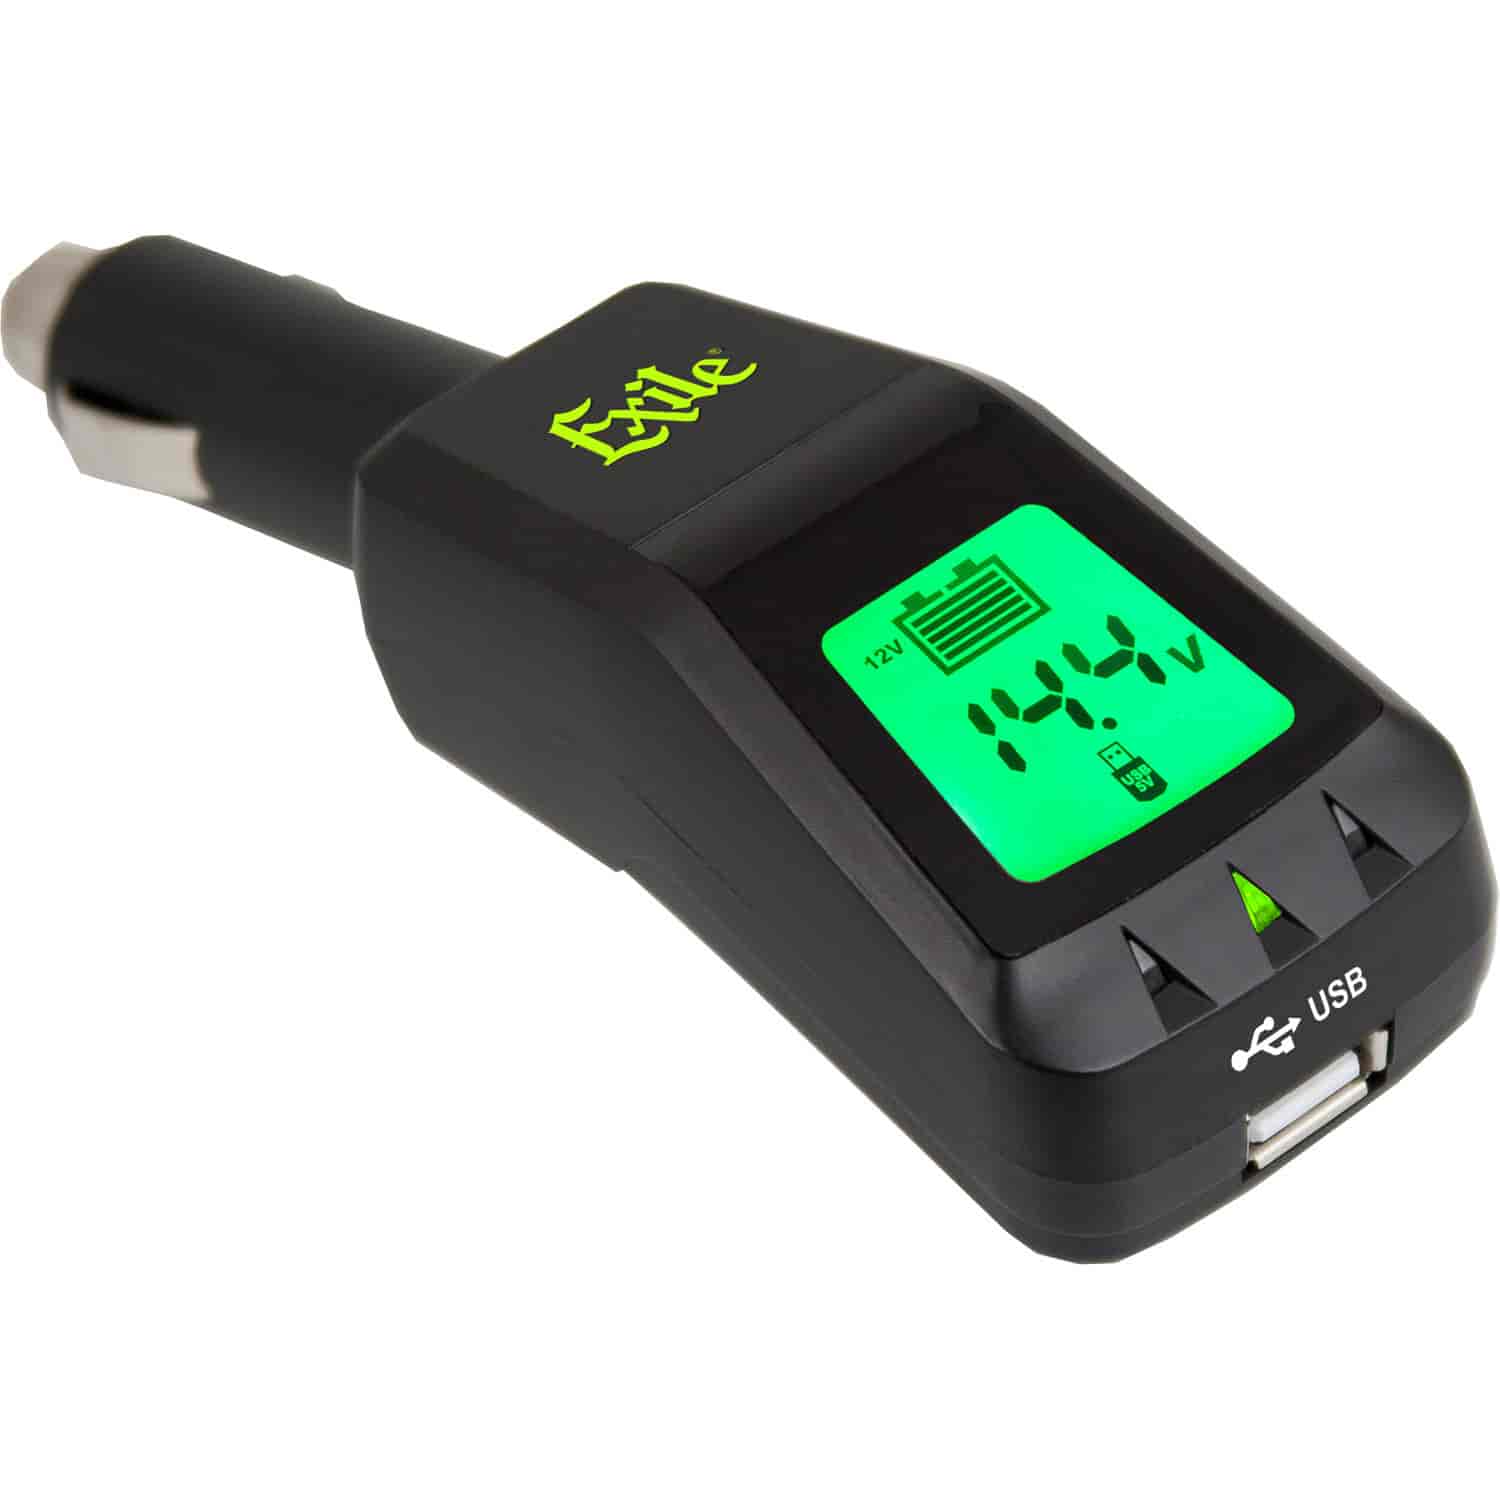 BT-1 LCD Digital Battery Monitor with USB Port